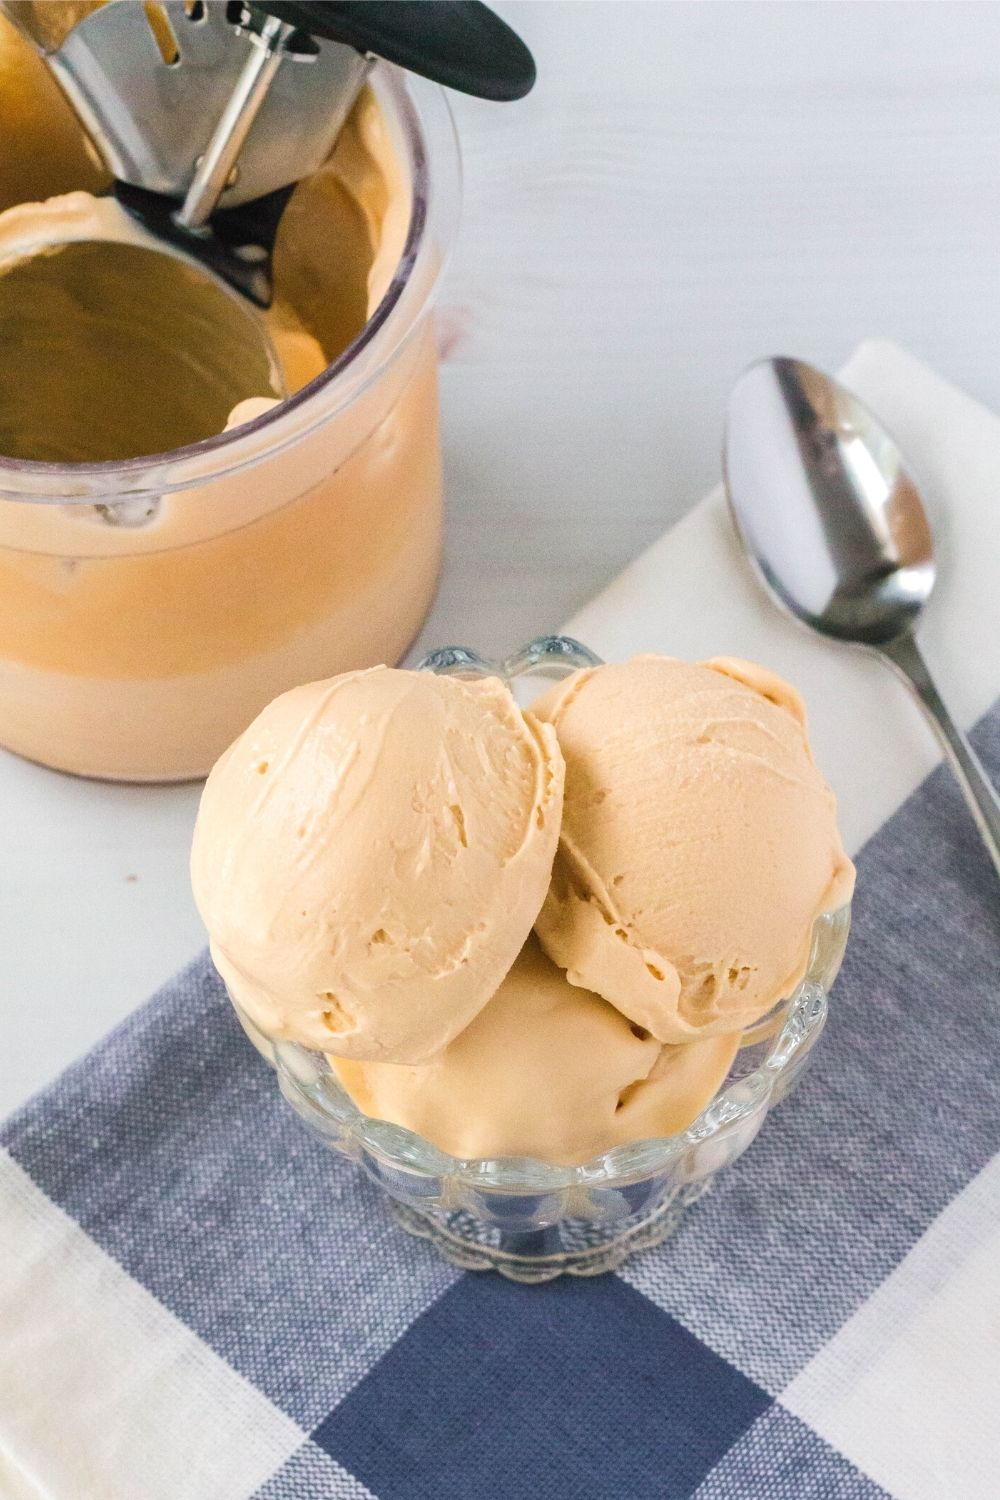 a glass dessert cup serving three scoops of Ninja Creami butterscotch pudding ice cream is in the foreground. A pint container and spoon are in the background.